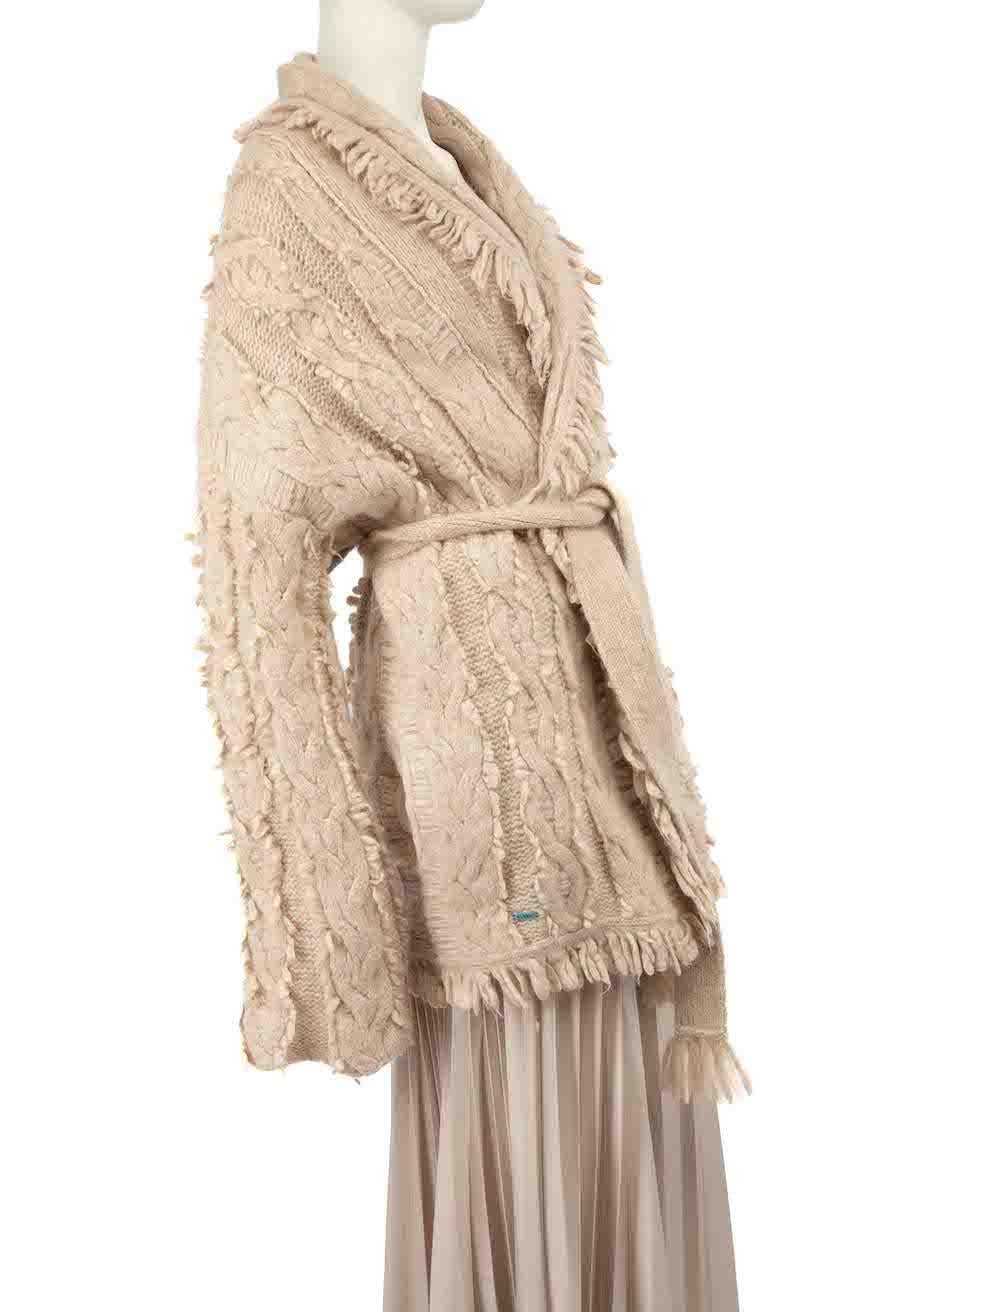 CONDITION is Very good. Hardly any visible wear to cardigan is evident on this used Alanui designer resale item.
 
 
 
 Details
 
 
 Beige
 
 Alpaca
 
 Knit cardigan
 
 Striped pattern
 
 Fringe edge
 
 Belted
 
 2x Side pockets
 
 
 
 
 
 Made in